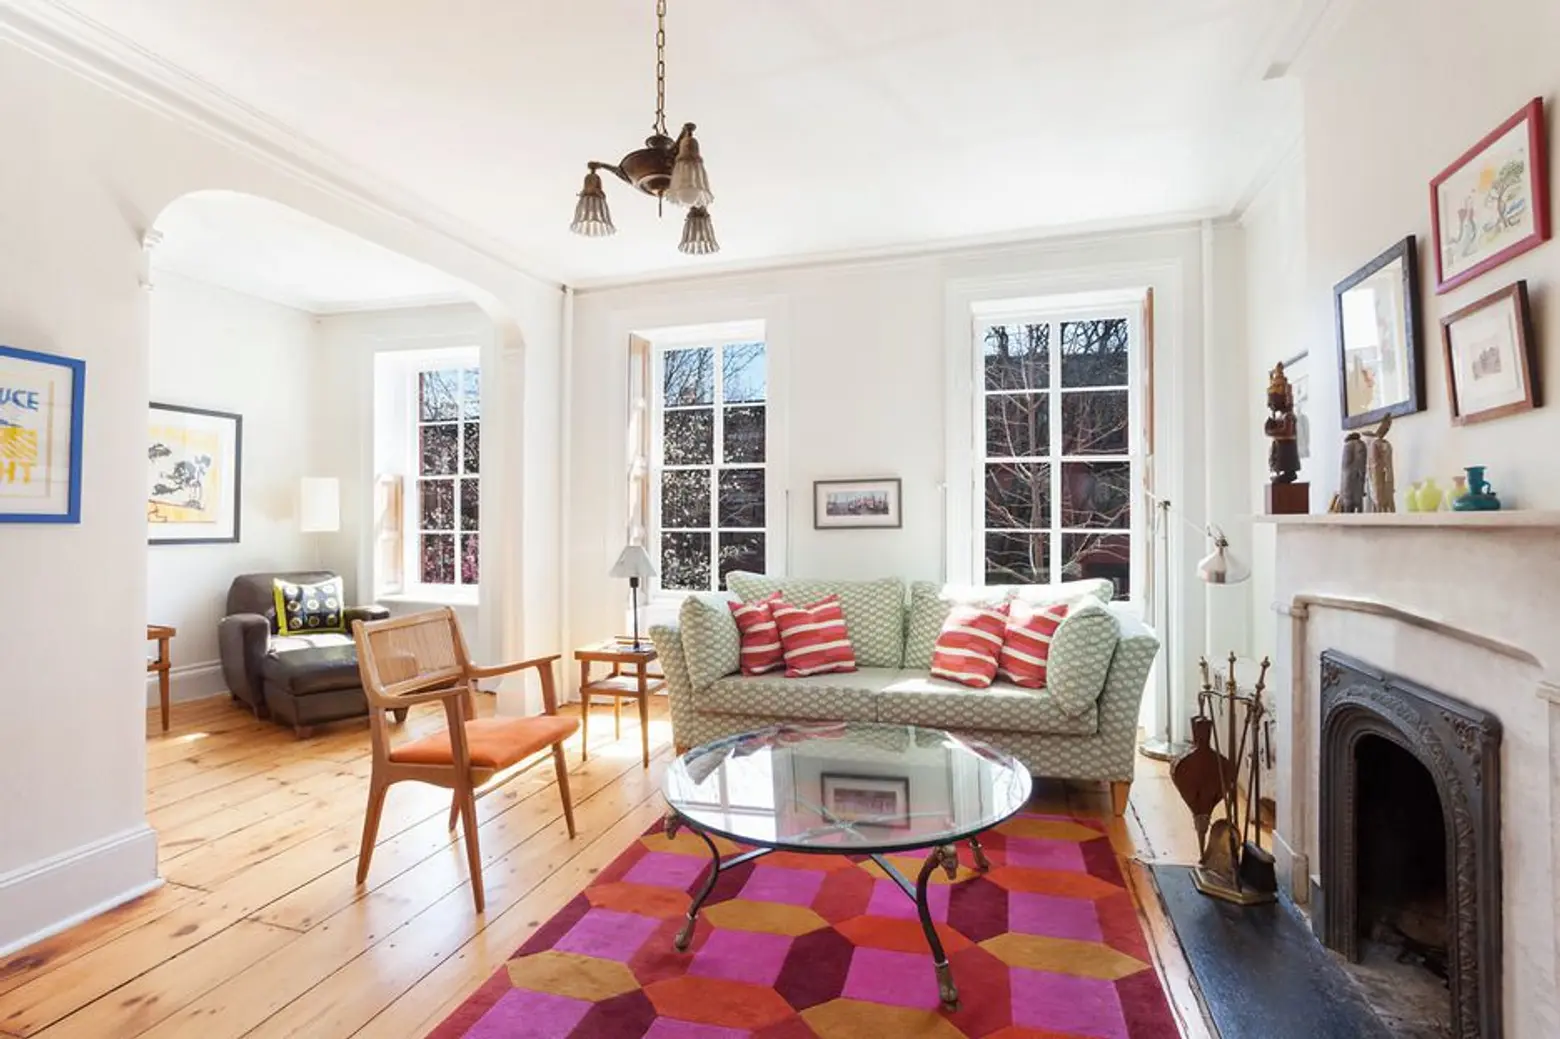 Dreamy duplex in a 19th century Boerum Hill townhouse asks $6,100/month